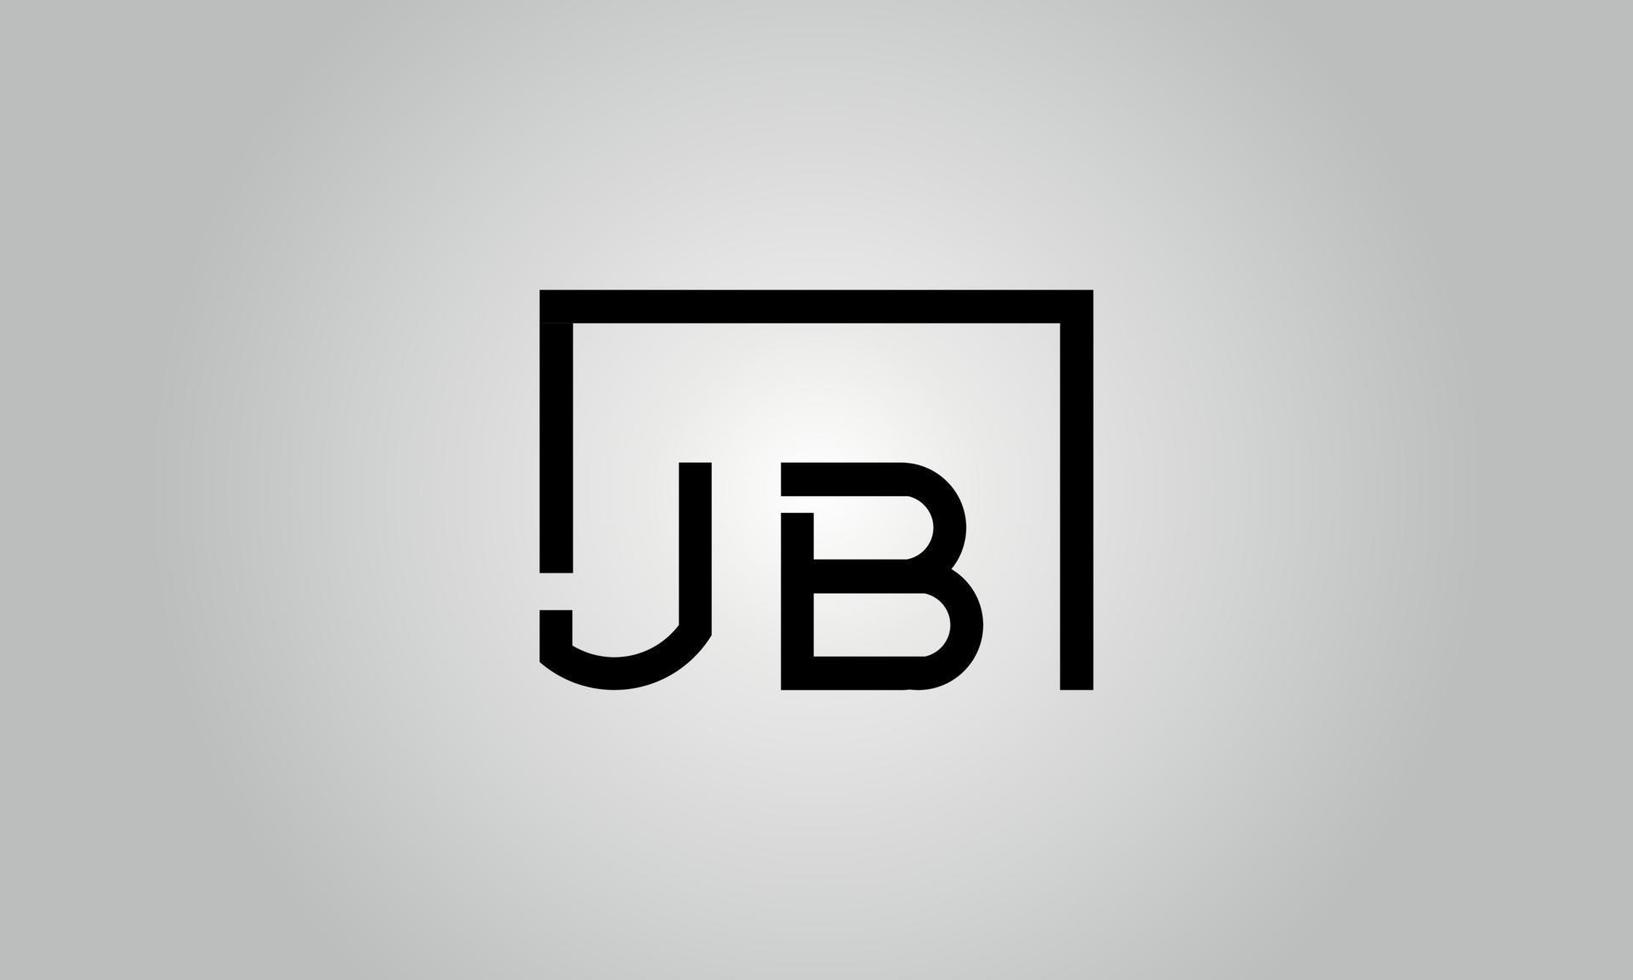 Letter JB logo design. JB logo with square shape in black colors vector free vector template.